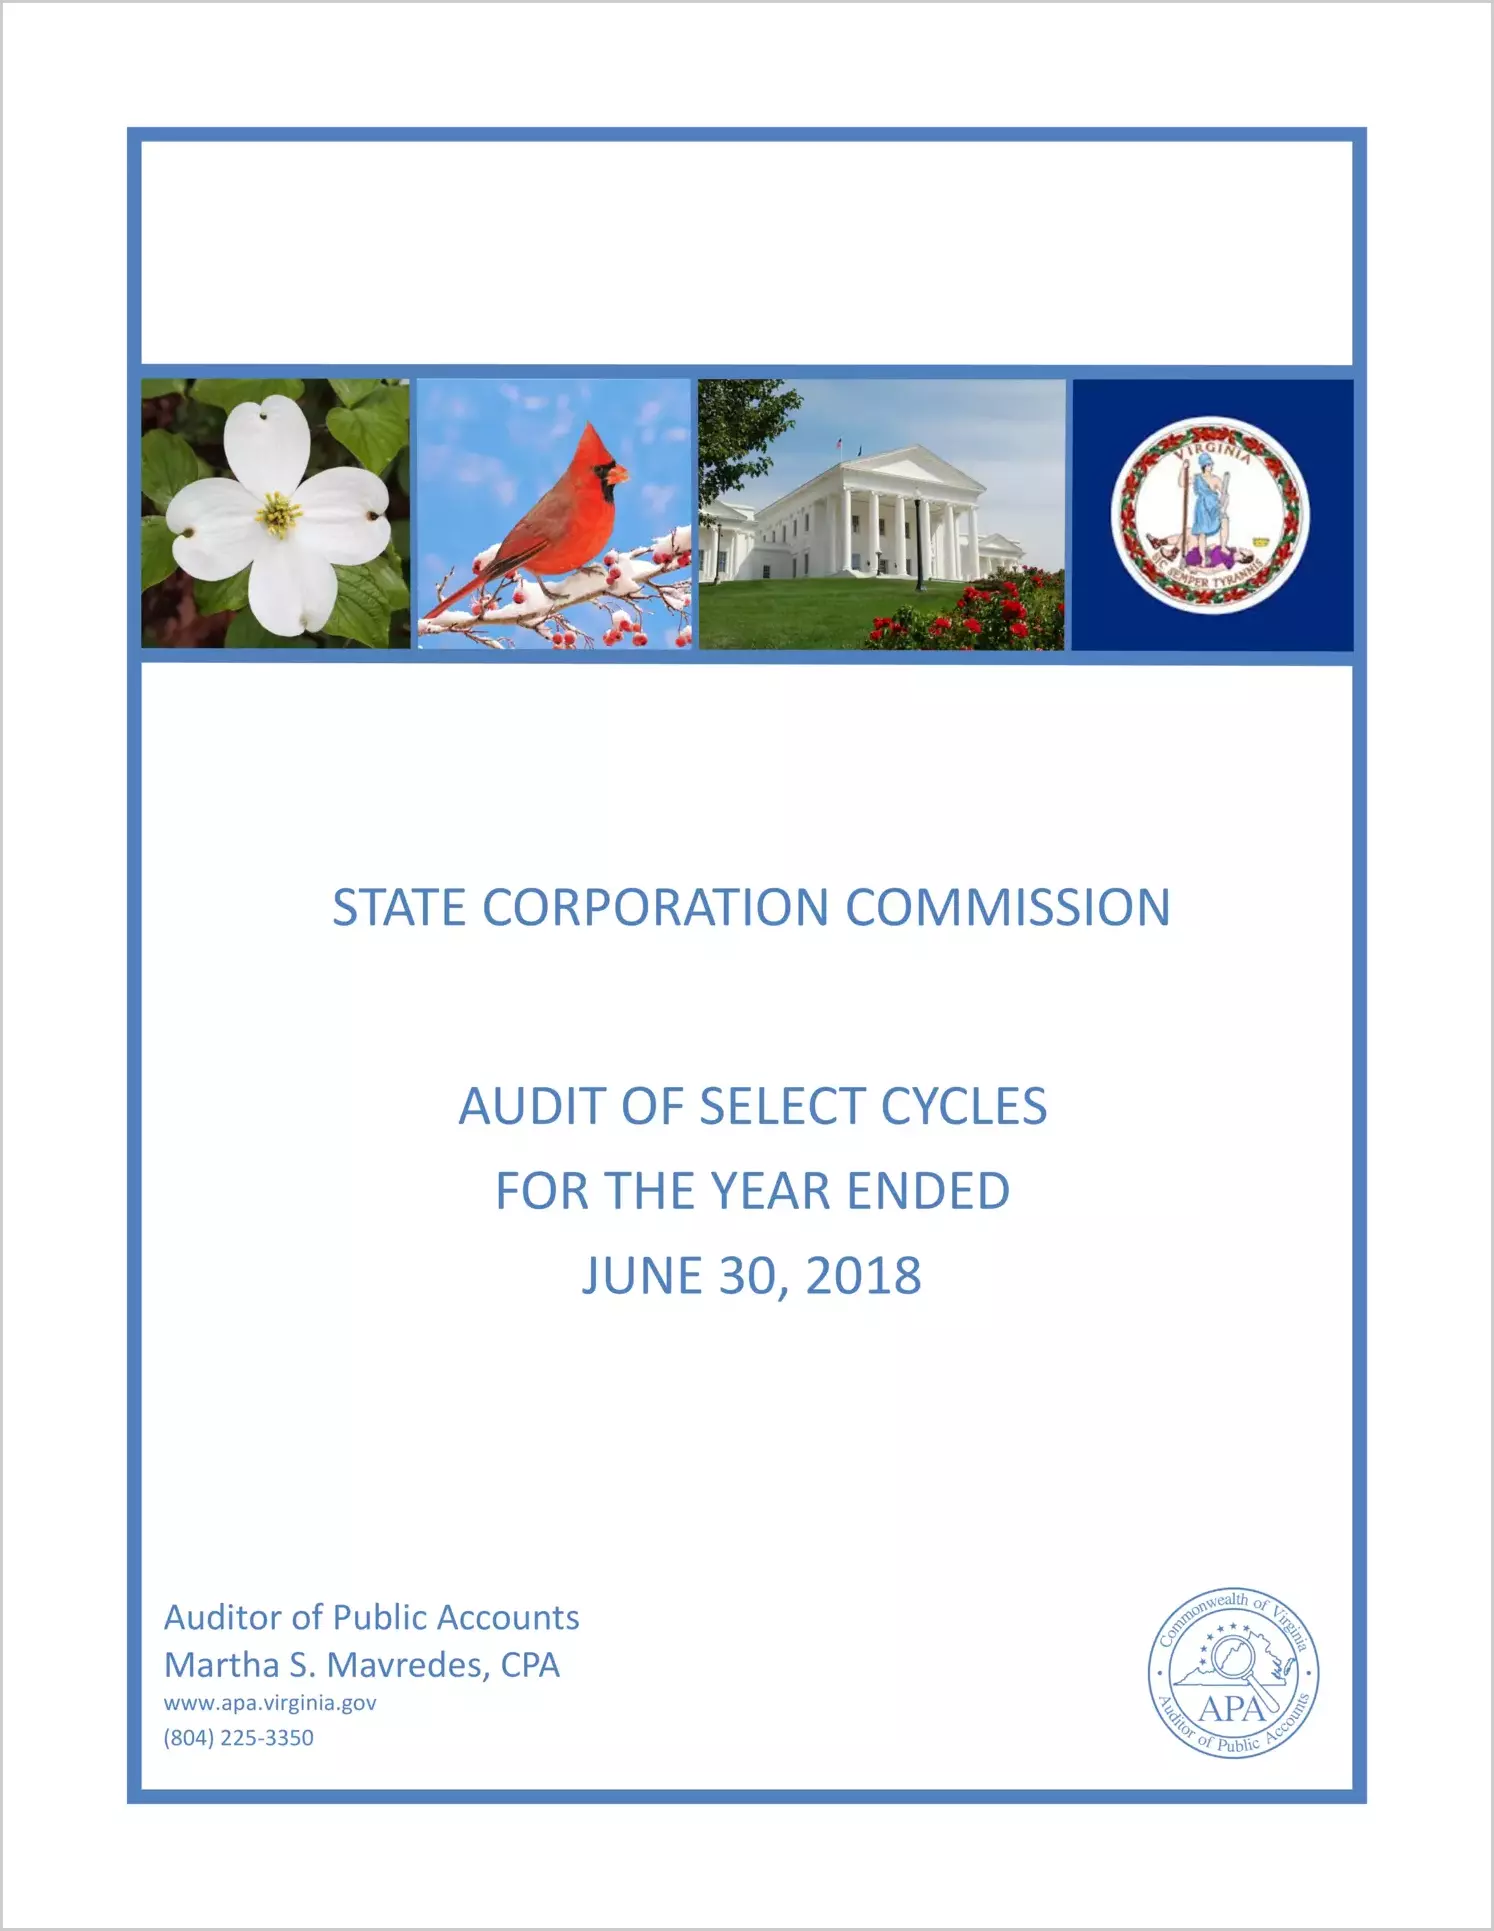 State Corporation Commission Audit of Select Cycles for the year ended June 30, 2018